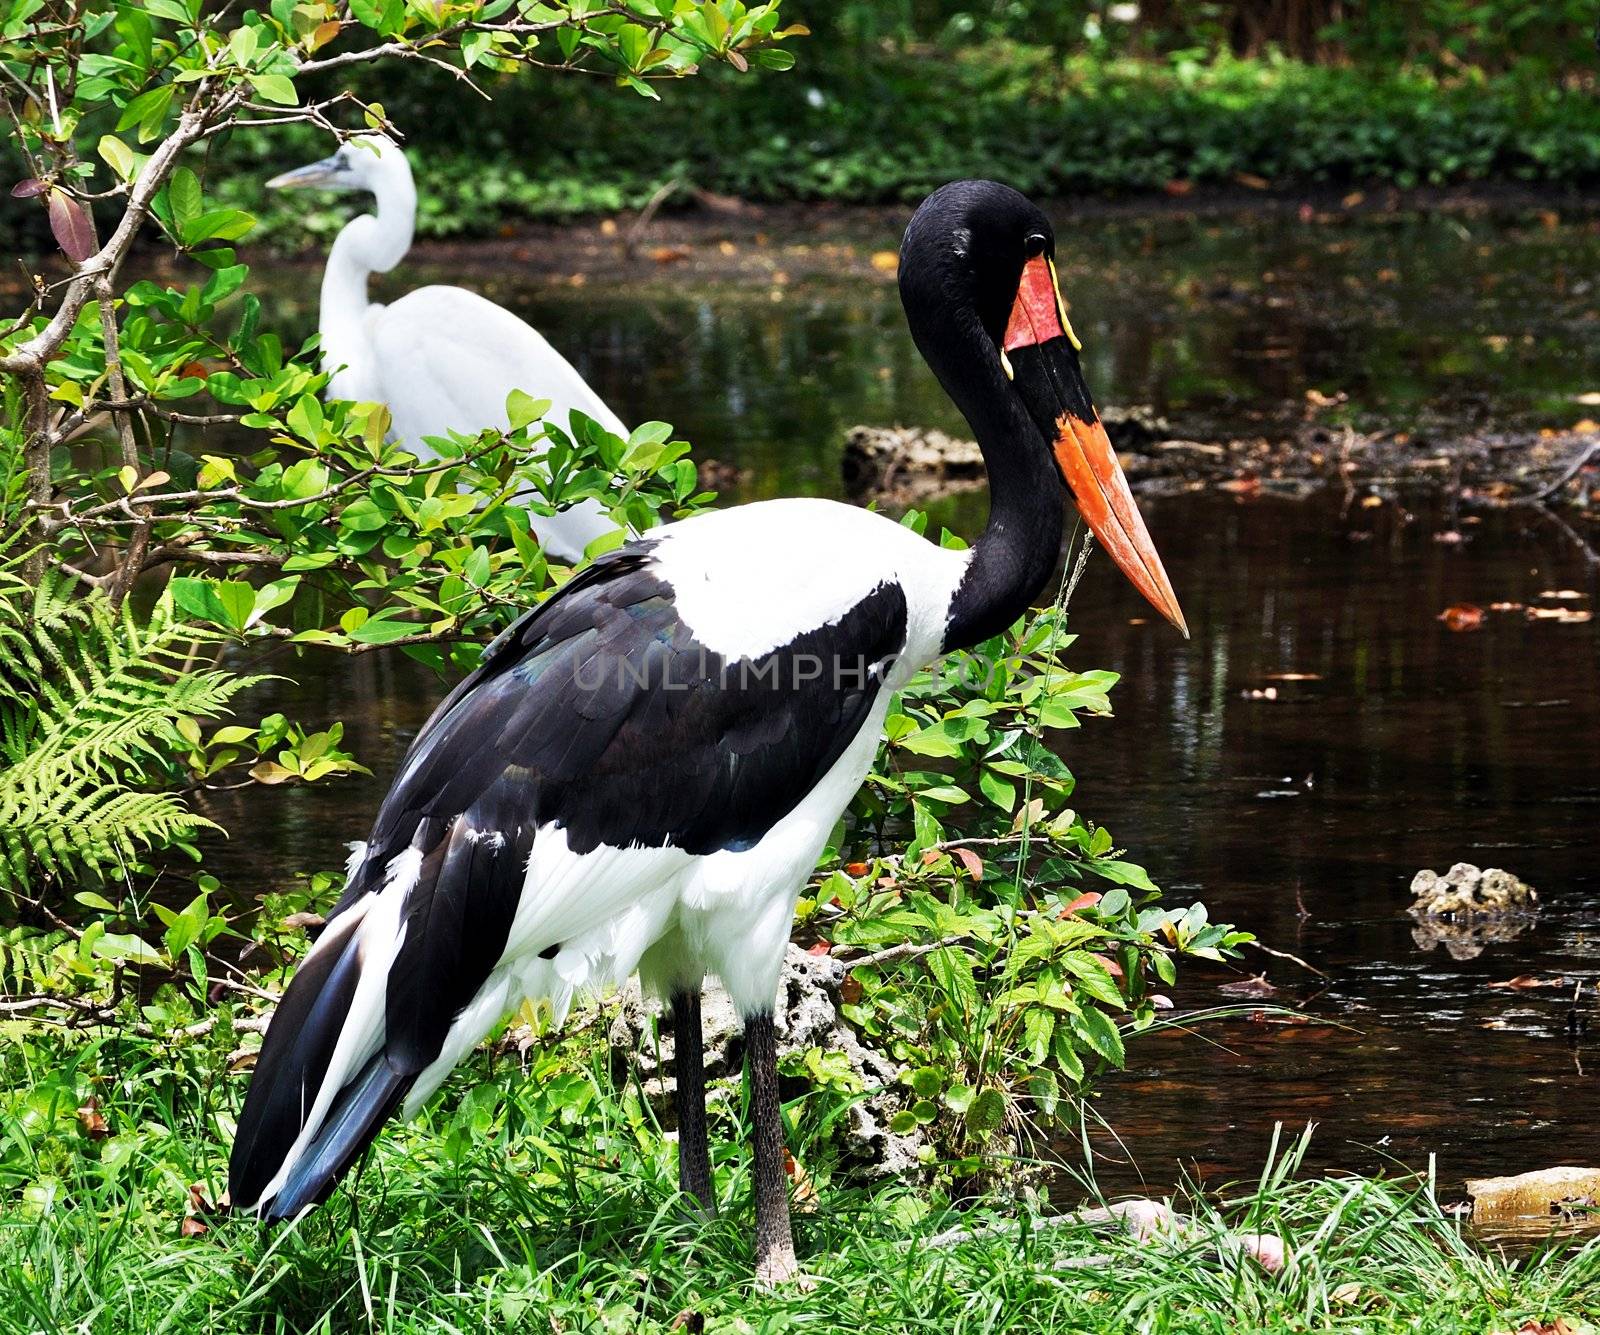 Saddle-billed stork at the Miami Zoo